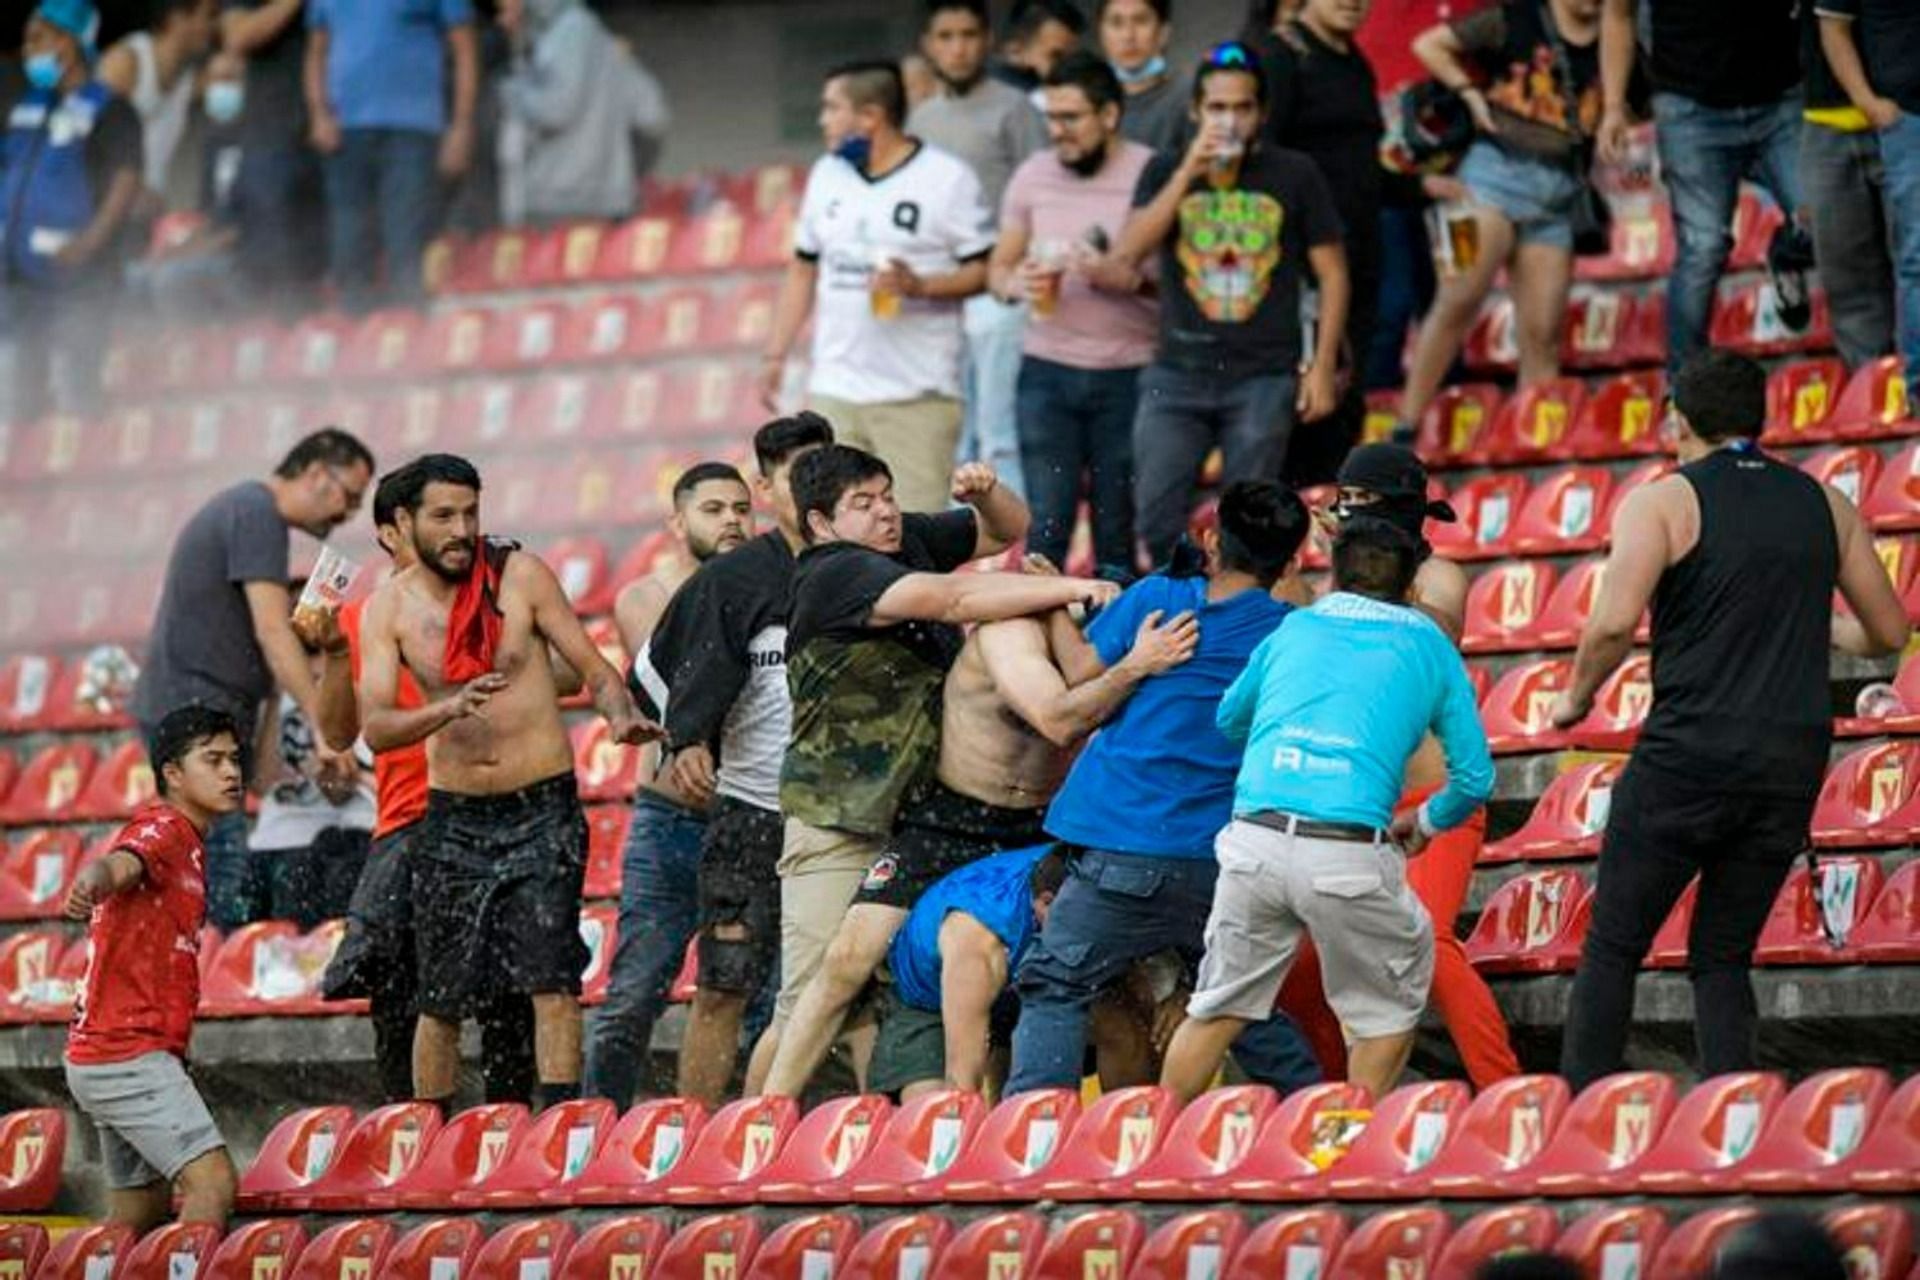 Mexican soccer game brawl leaves fans severely injured (Image via AP)